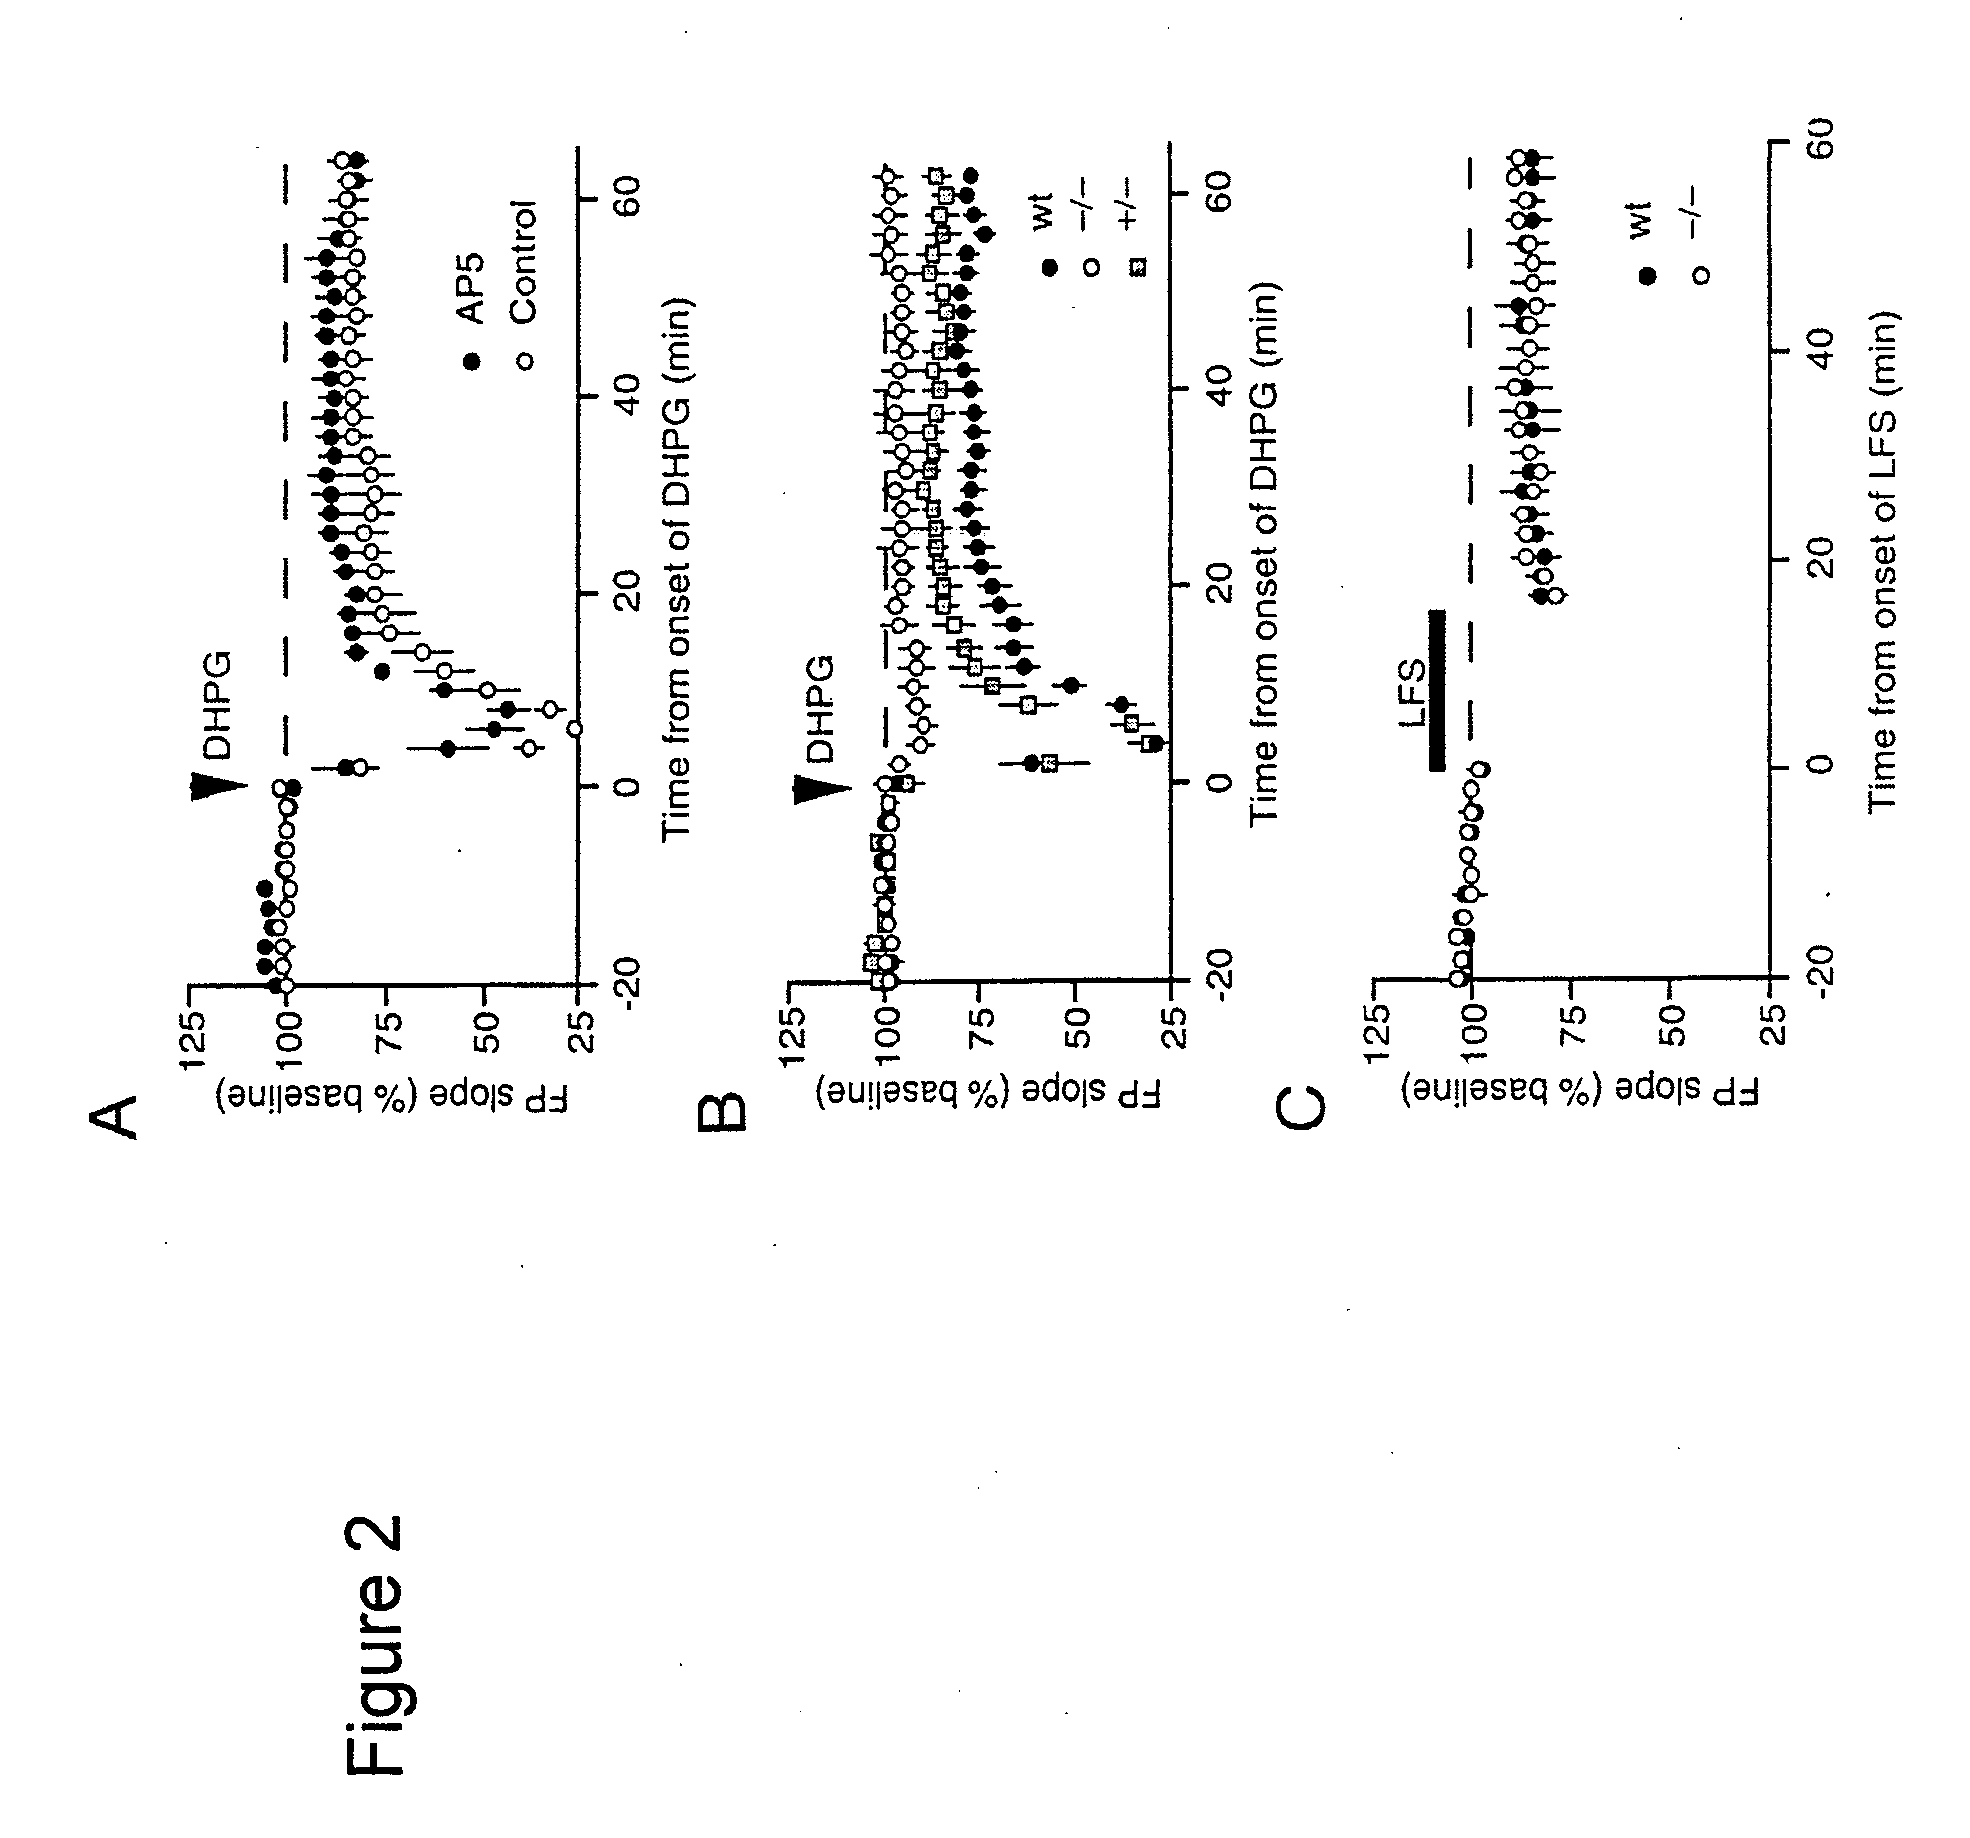 Methods of treating disorders with group I mGluR antagonists